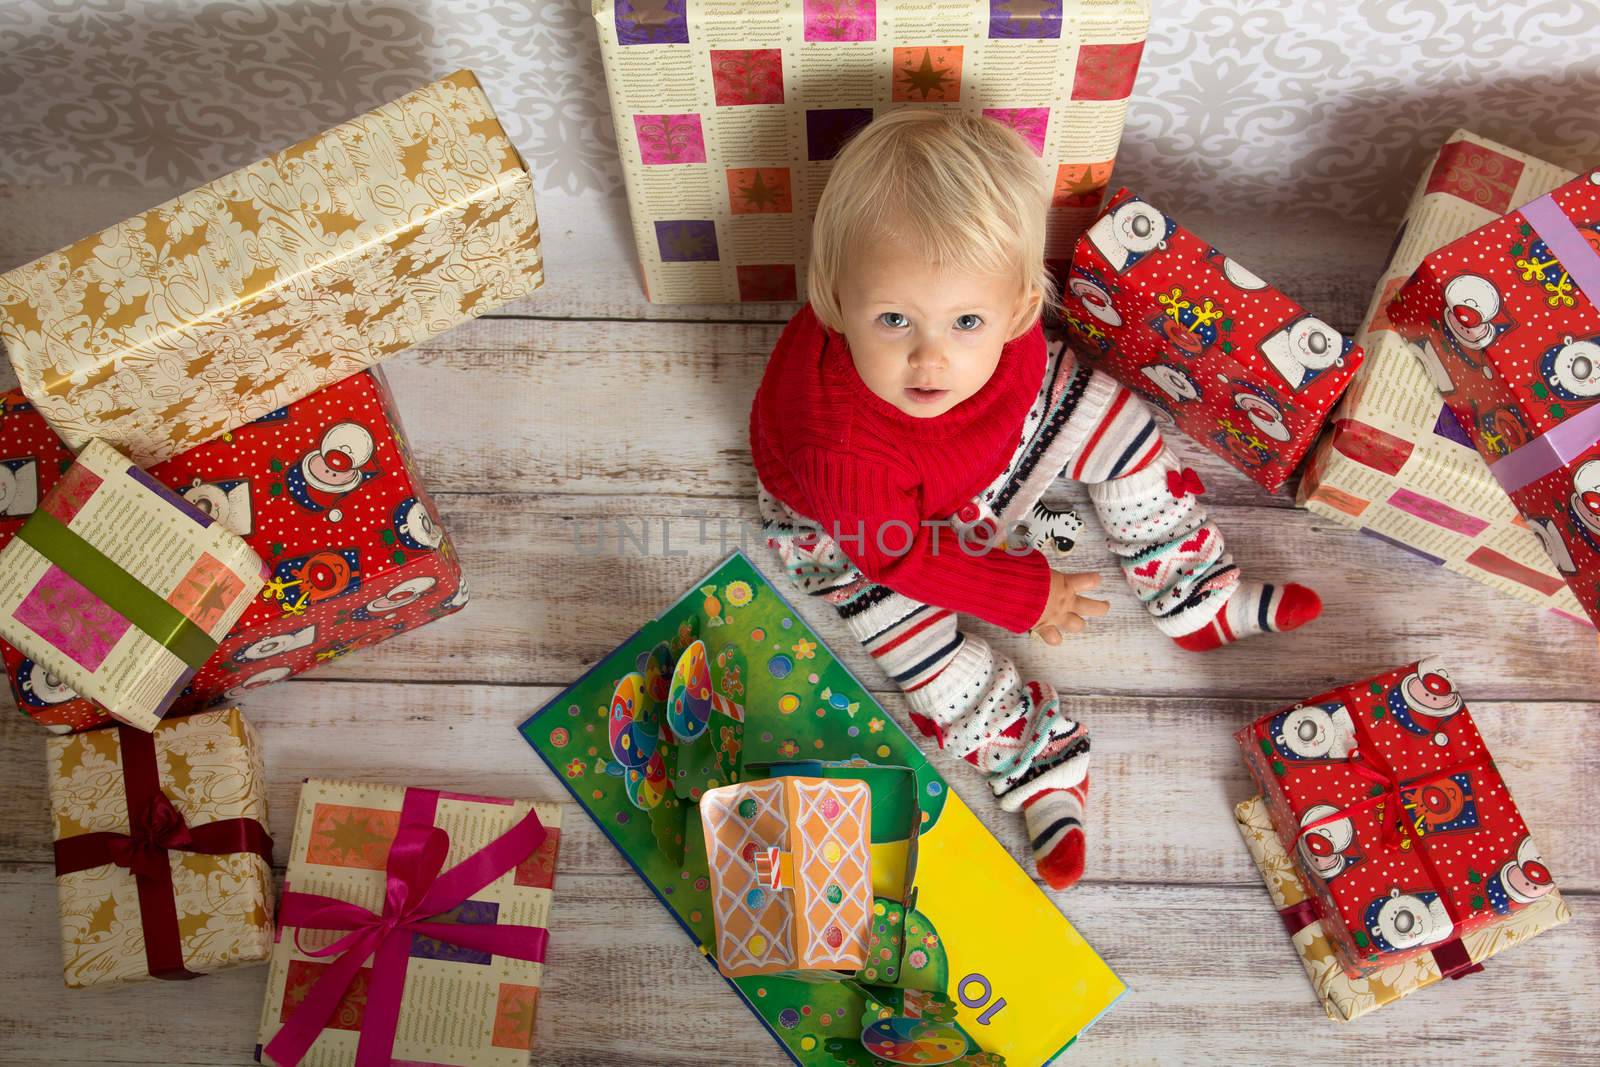 Dressed festively girl with stacks of present boxes around sitting on the floor and looking at the camera